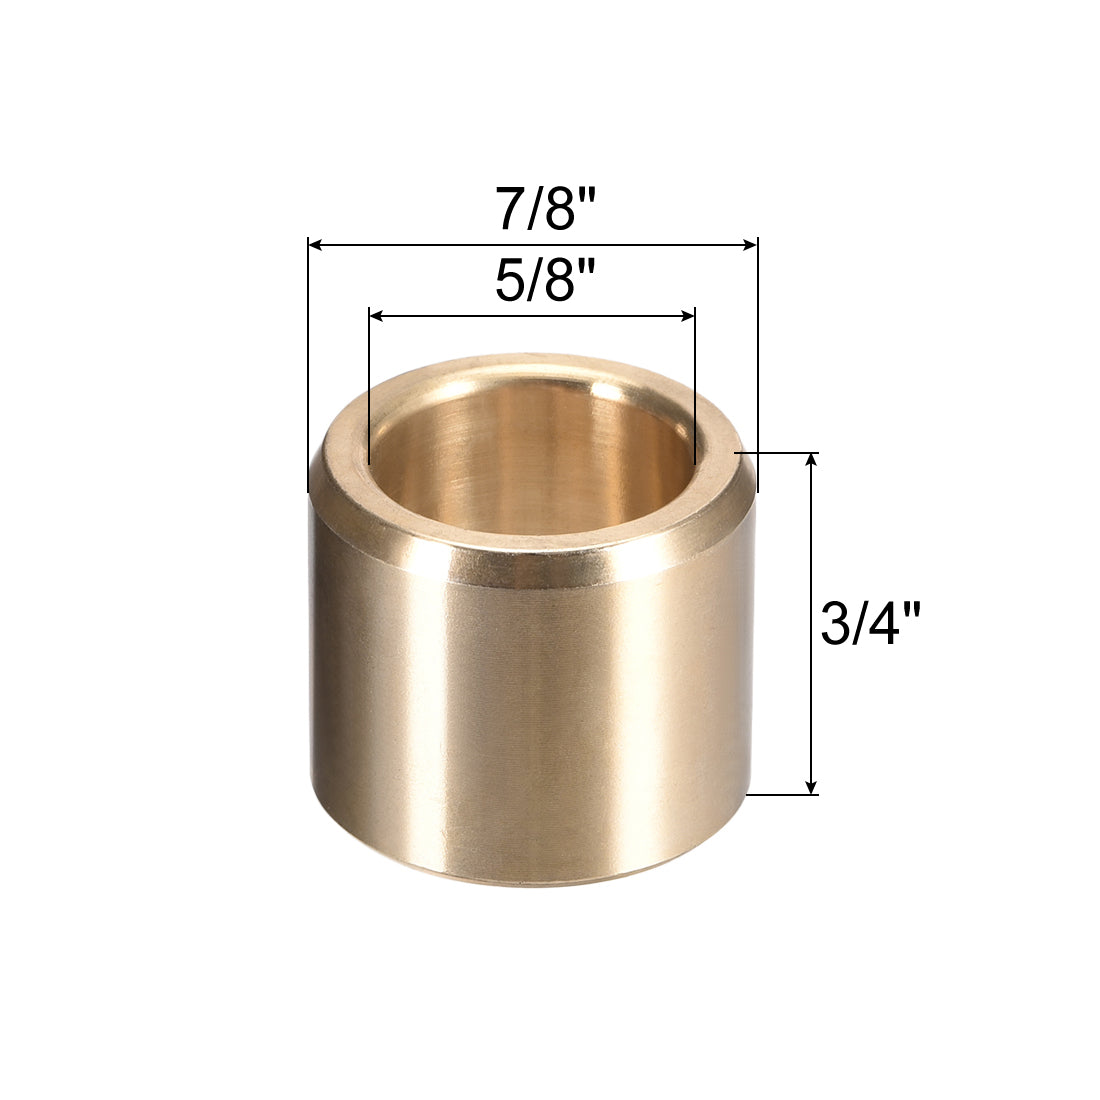 uxcell Uxcell Bearing Sleeve Length Self-Lubricating Sintered Bronze Bushing